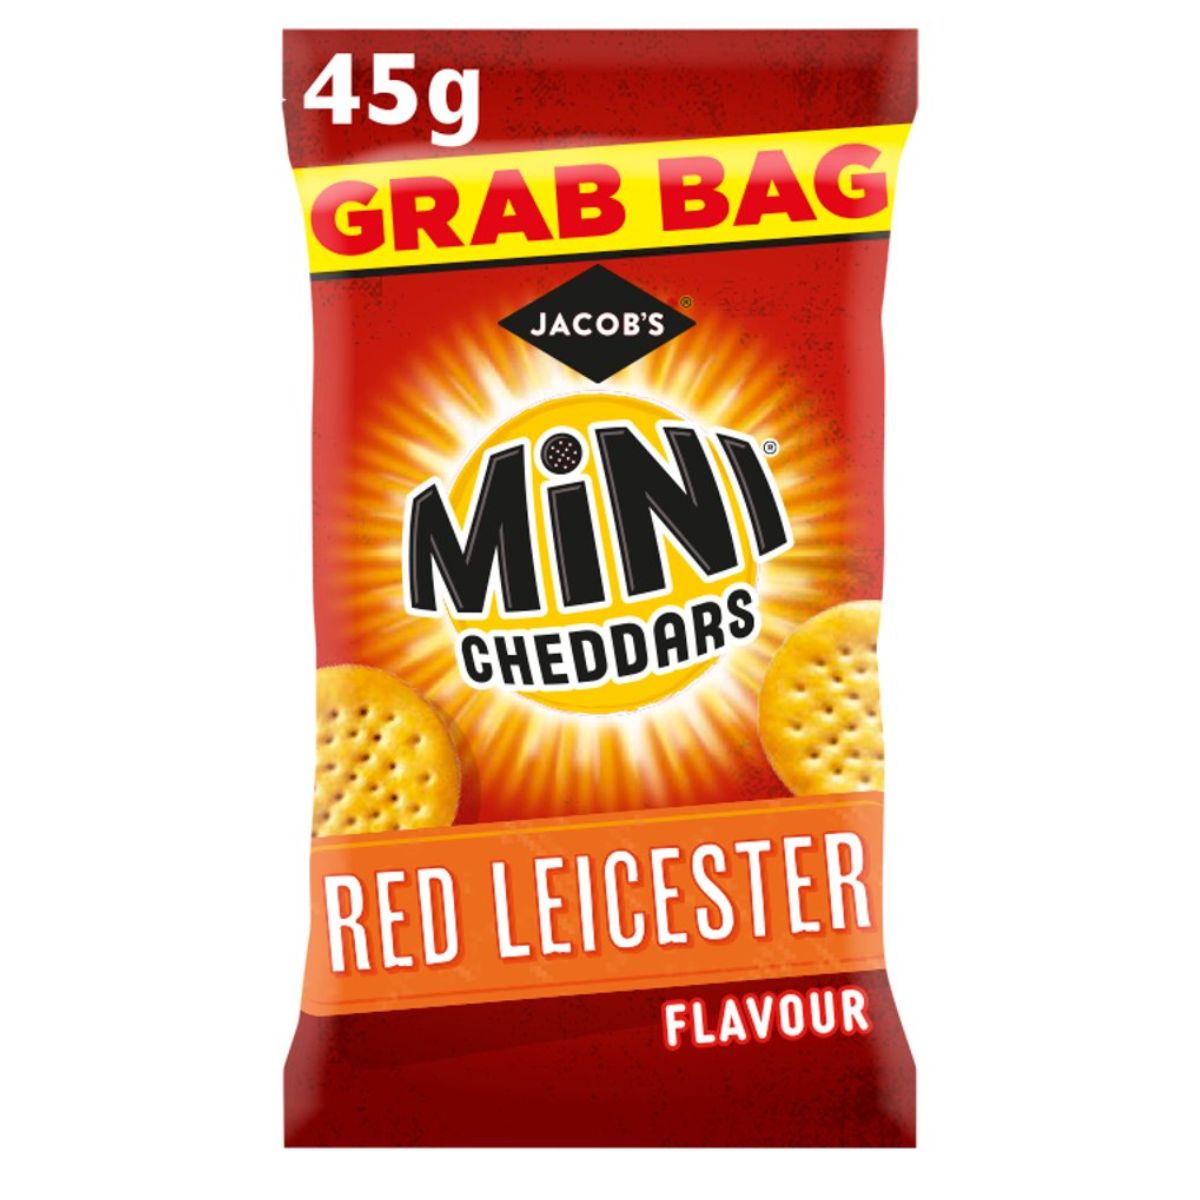 Jacobs - Mini Cheddars Red Leicester Snacks Grab Bag - 45g red leicester flavour.